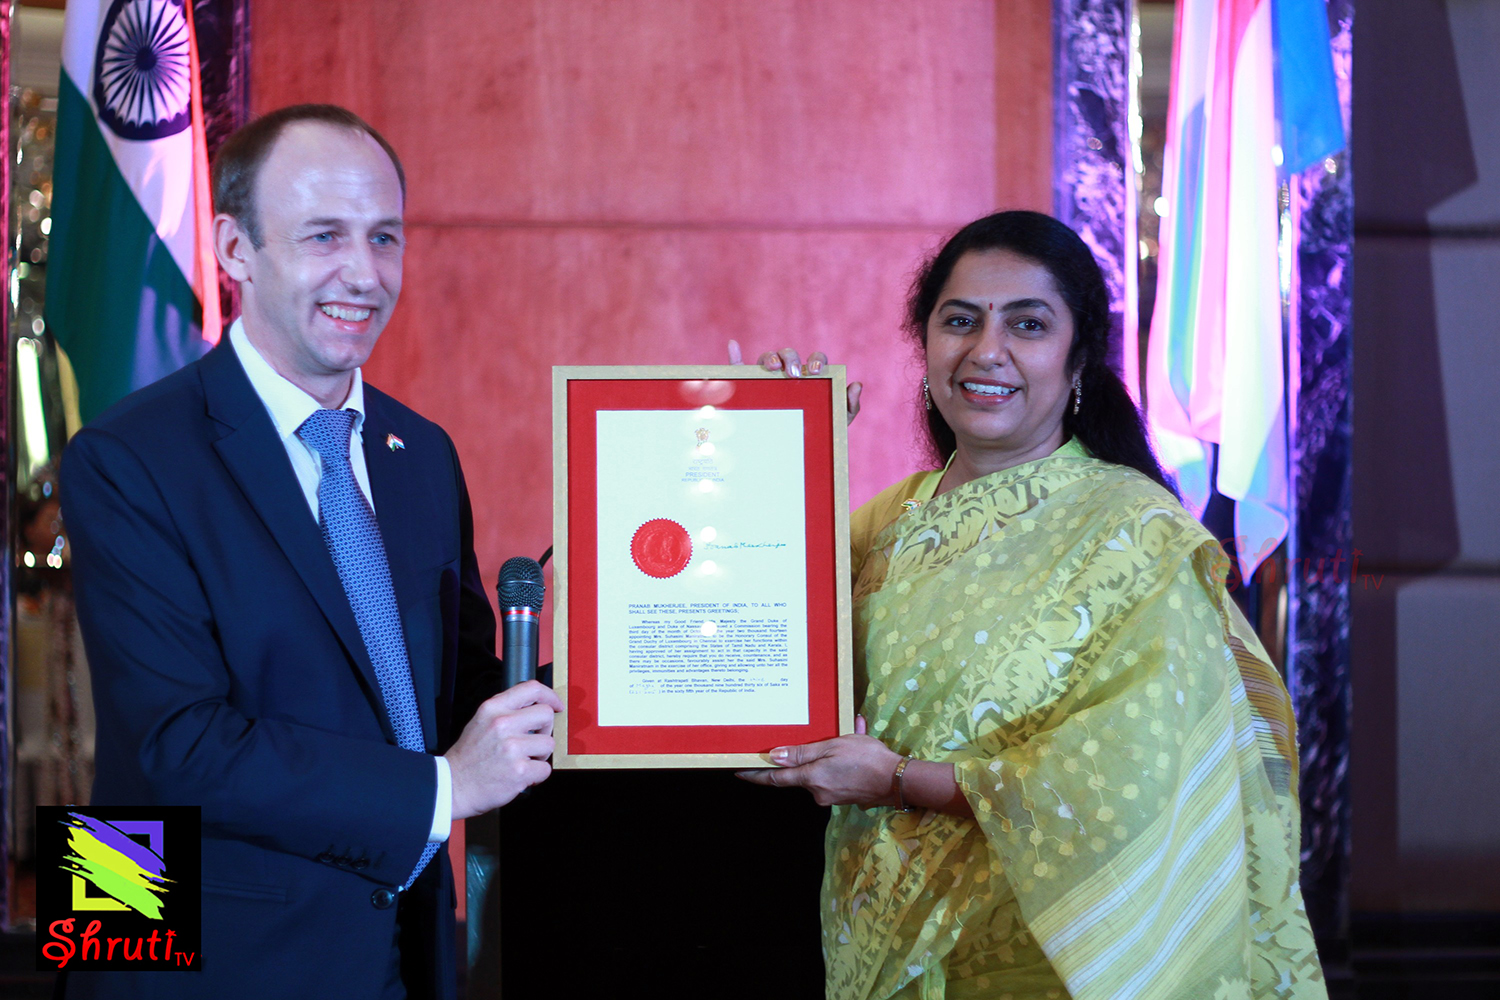 Actress Suhasini Maniratnam as the Honorary Consul of the Grand Duchy of Luxembourg